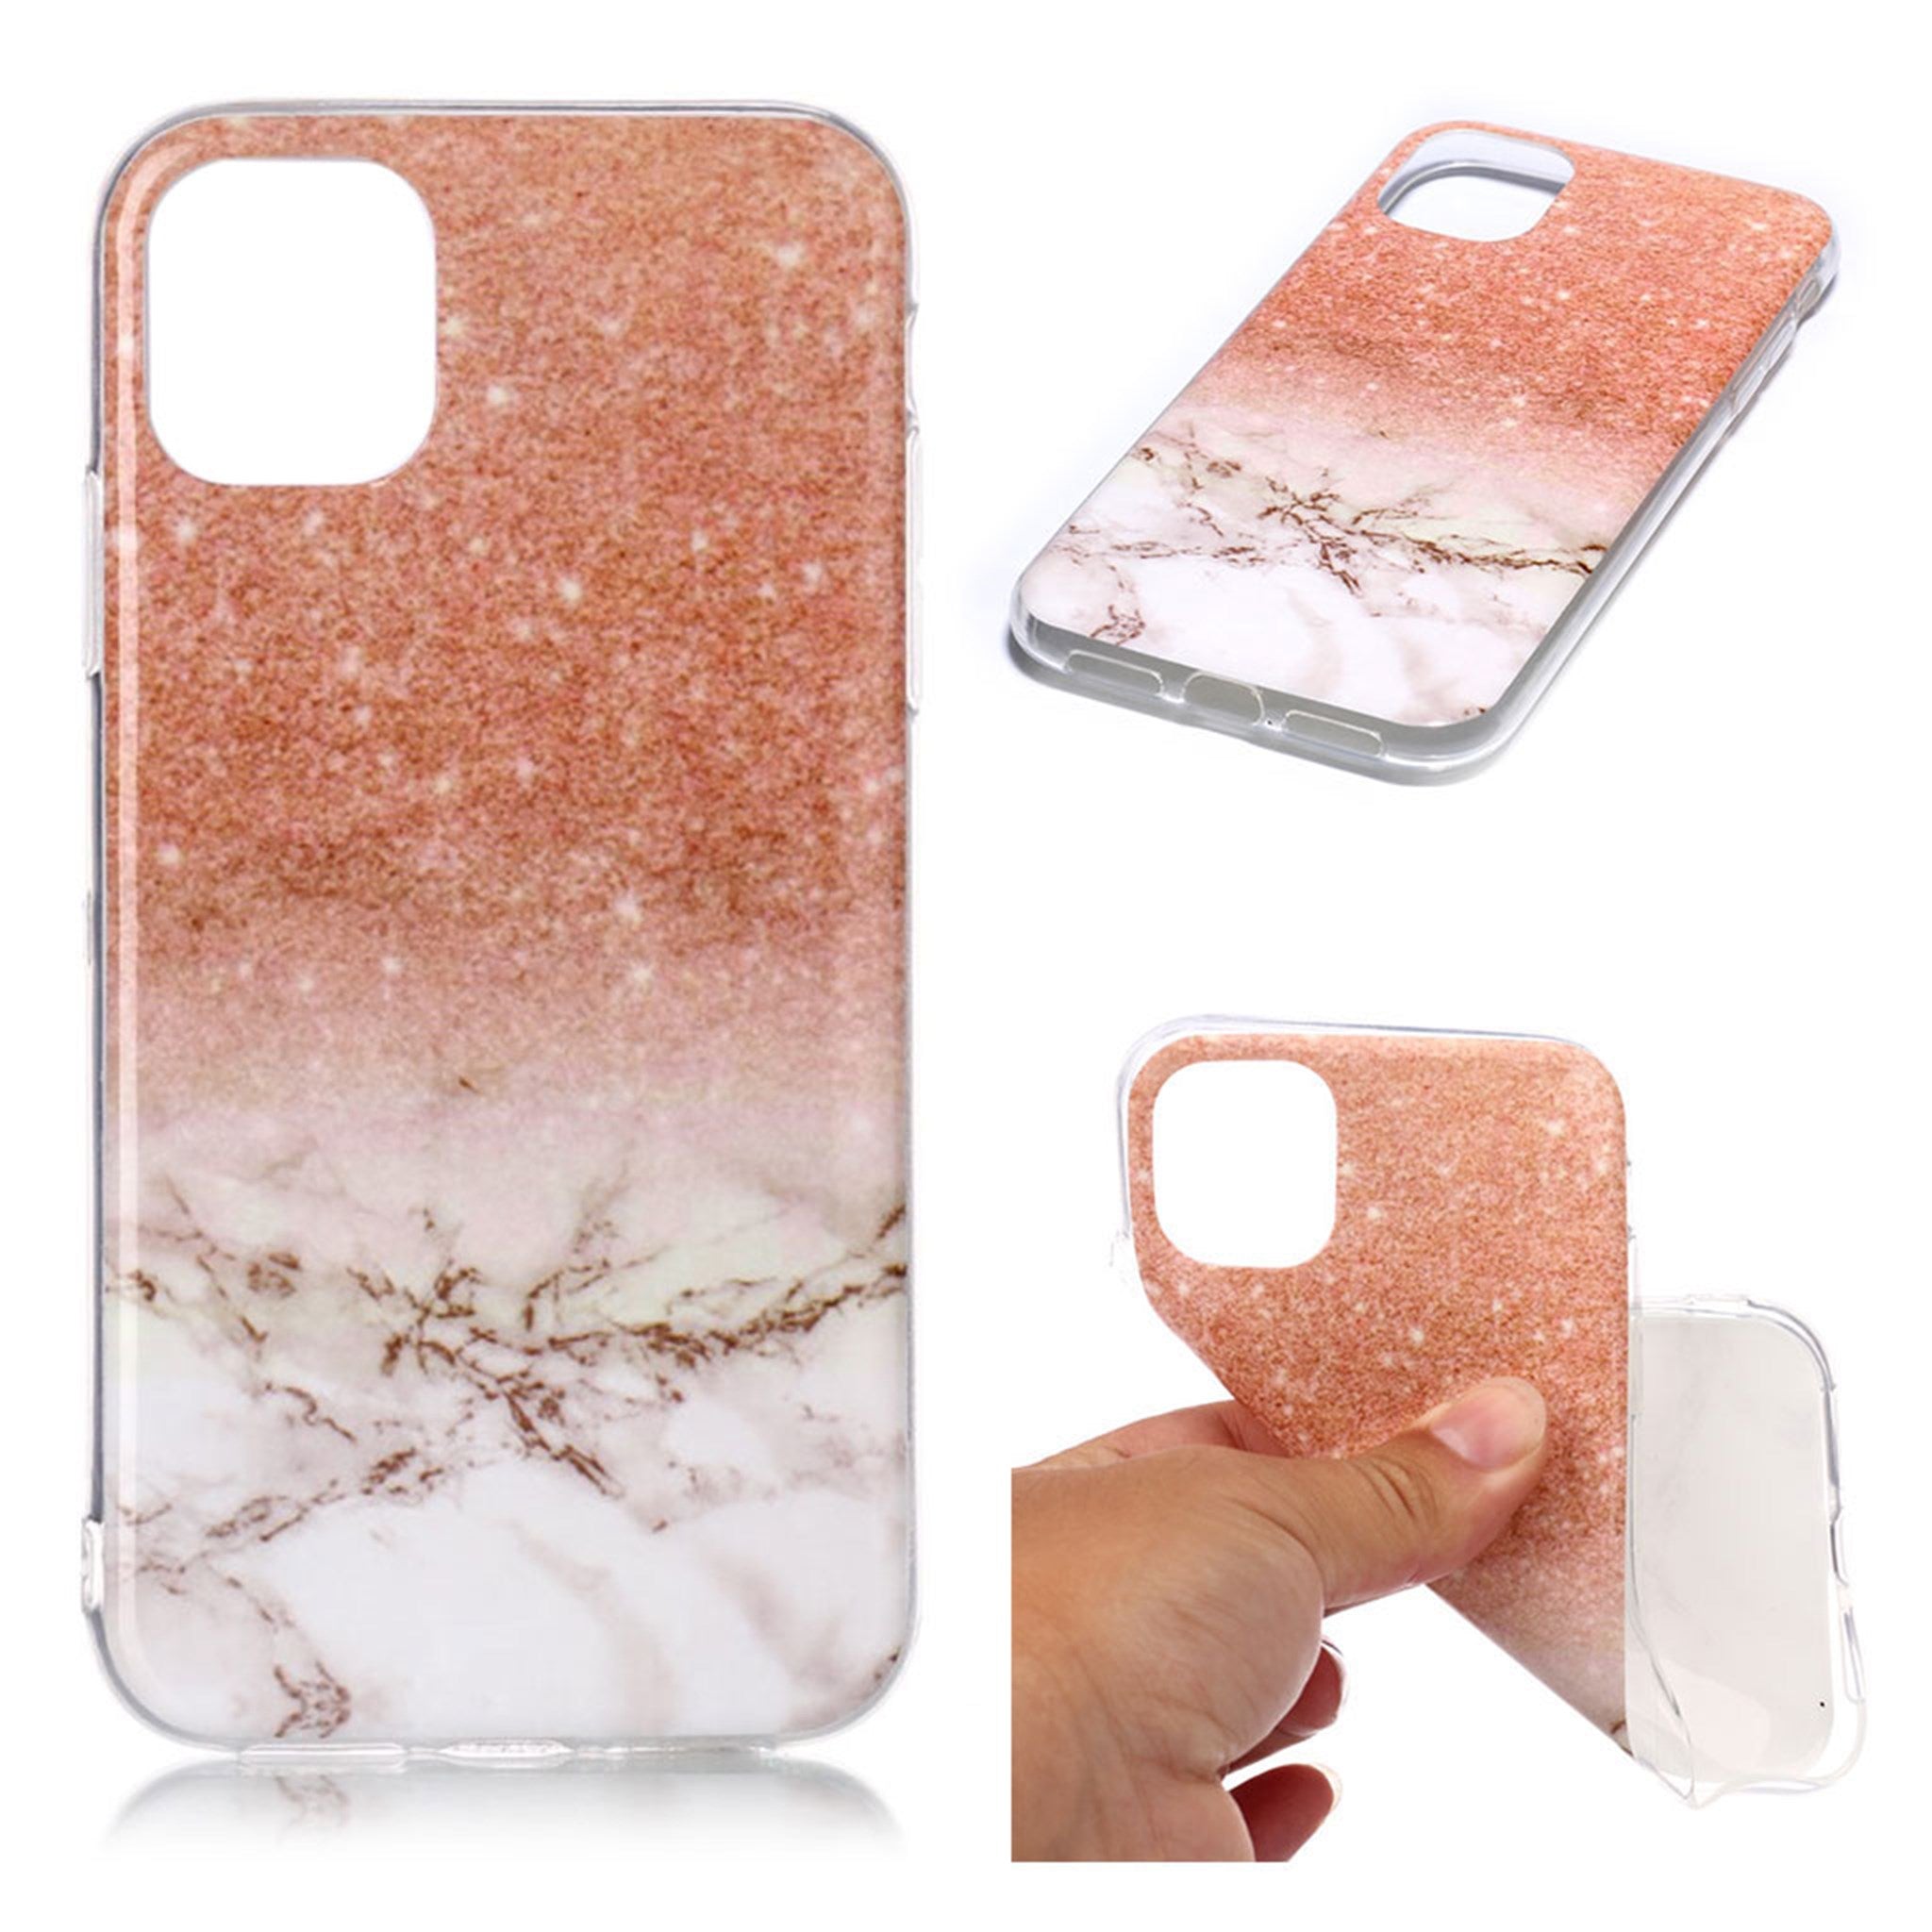 Marble iPhone 11 Pro case - Plum / White Marble